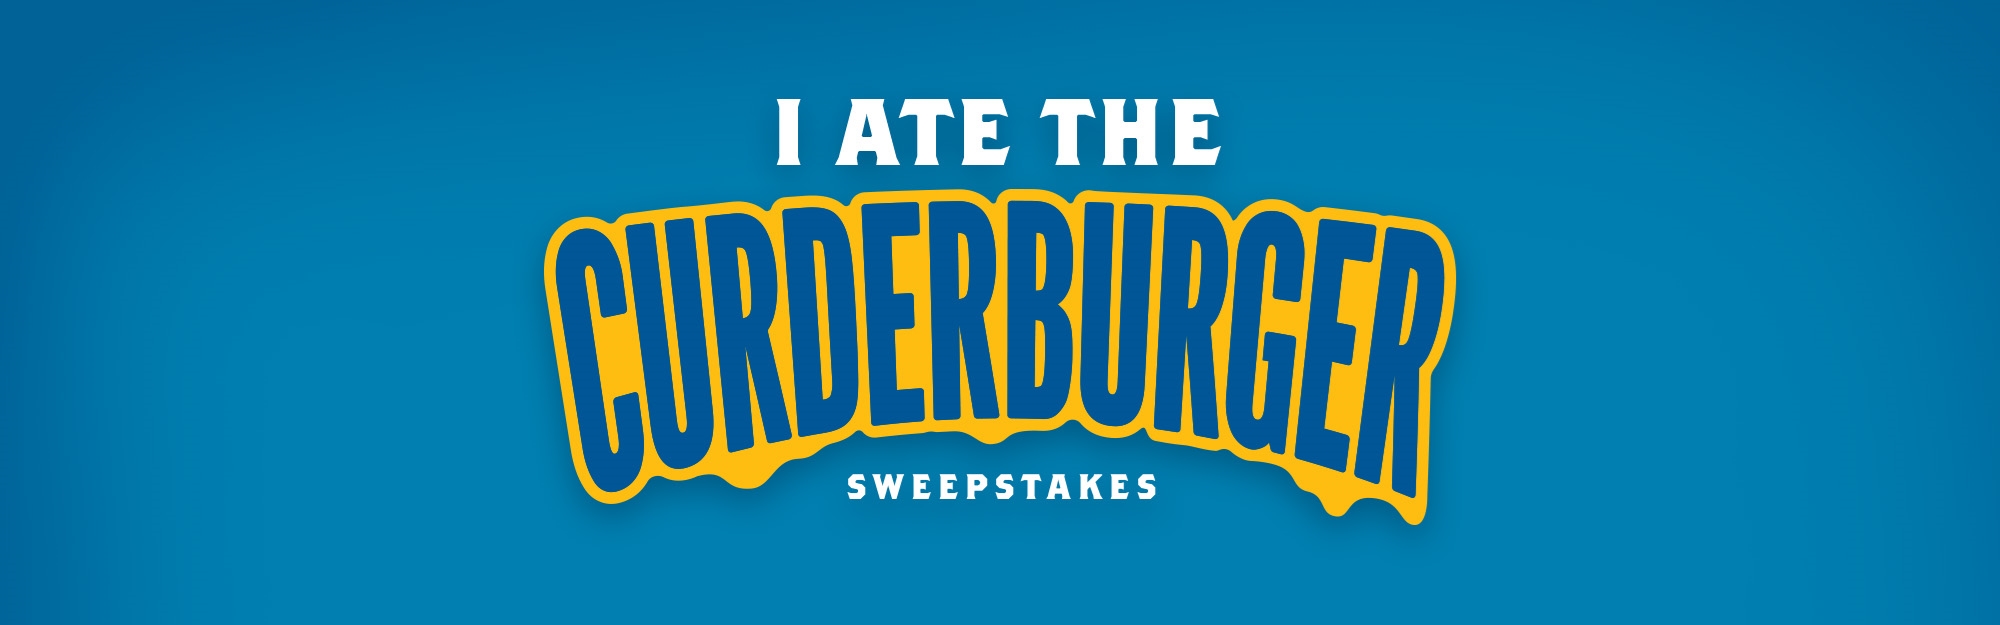 I ate the CurderBurger Sweepstakes